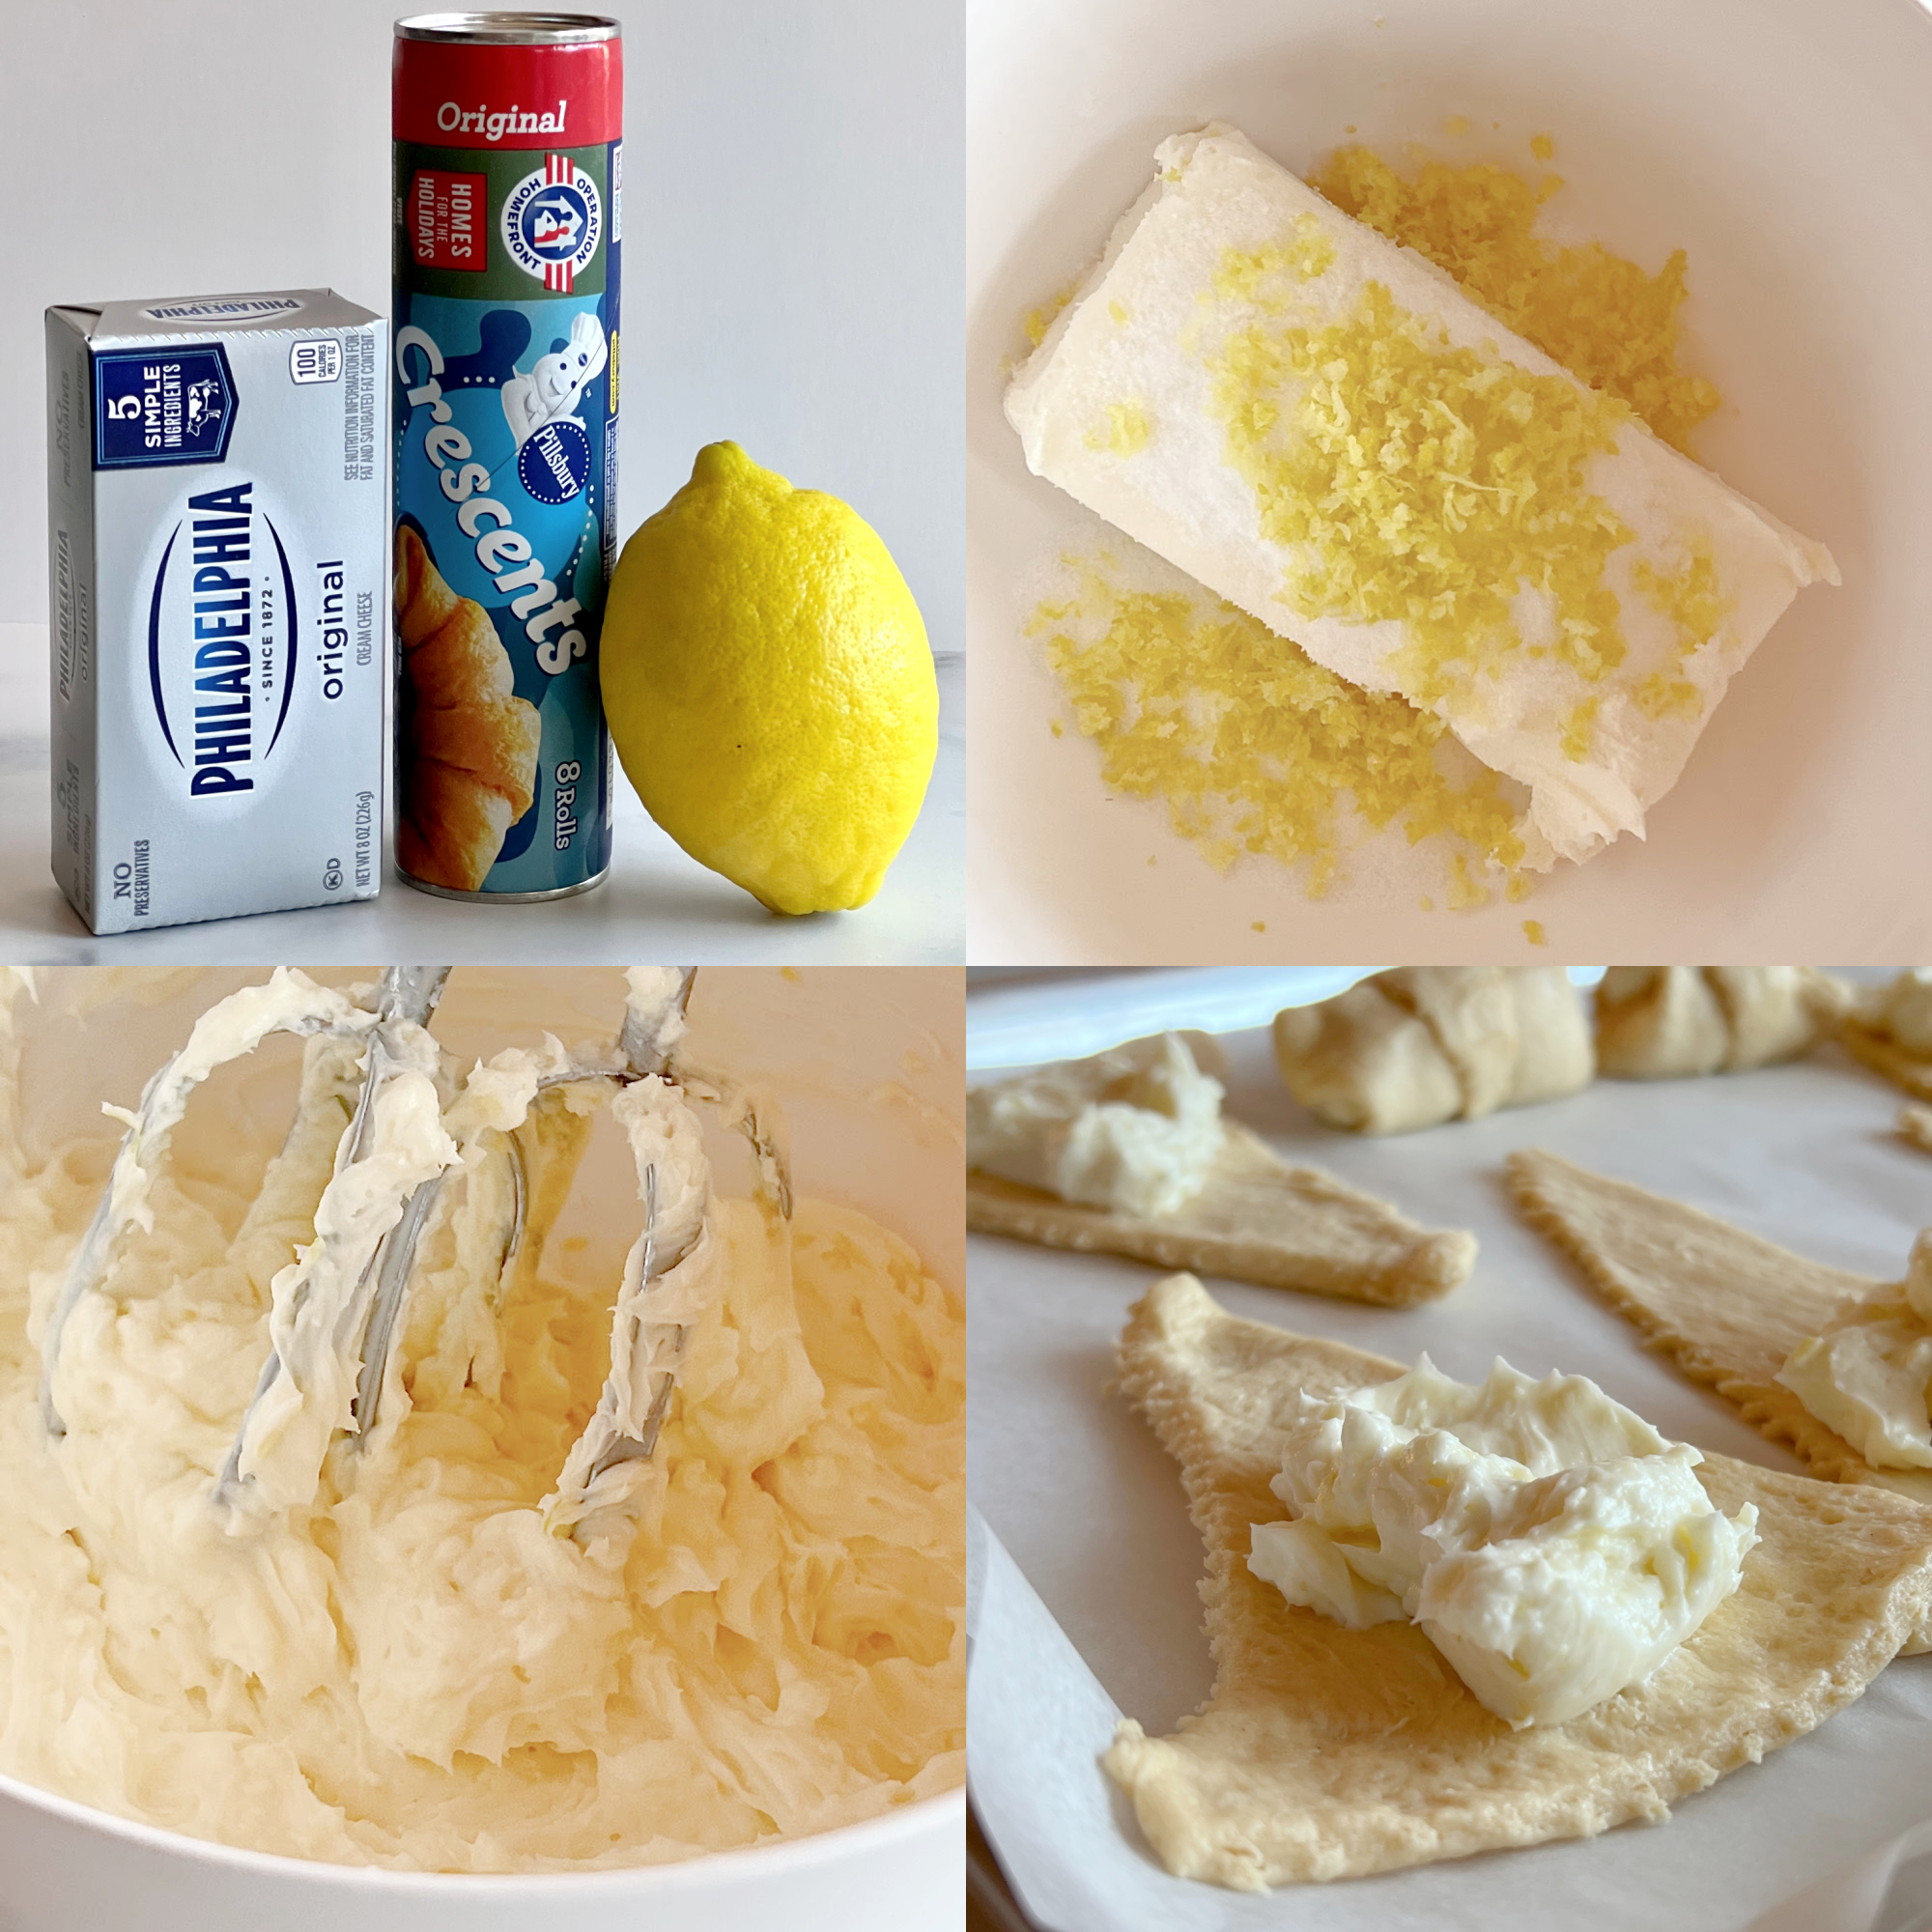 This is a 4 photo collage showing. The top left photo shows a picture of a box of cream cheese, a can of crescent rolls and a lemon. The top right photo shows a white bowl with the cream cheese, sugar and grated lemon peel. The bottom left photo shows the cream cheese filling after mixing. The bottom right photo shows the cream cheese mixture added to the crescent rolls, ready to roll. 